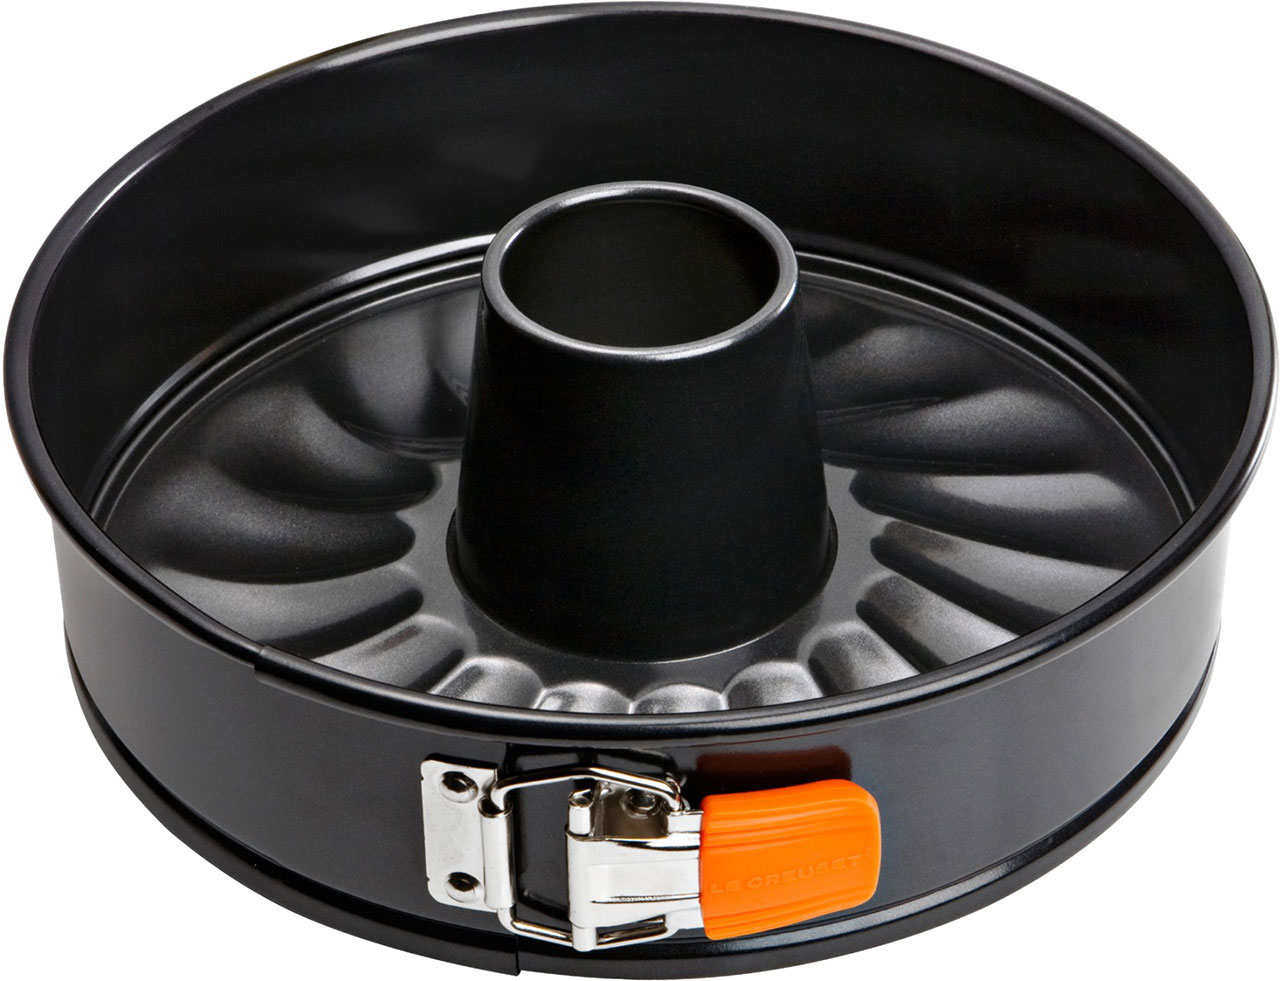 Le Creuset Springform Round Cake Tin 26cm with Funnel Insert Toughened Non-Stick